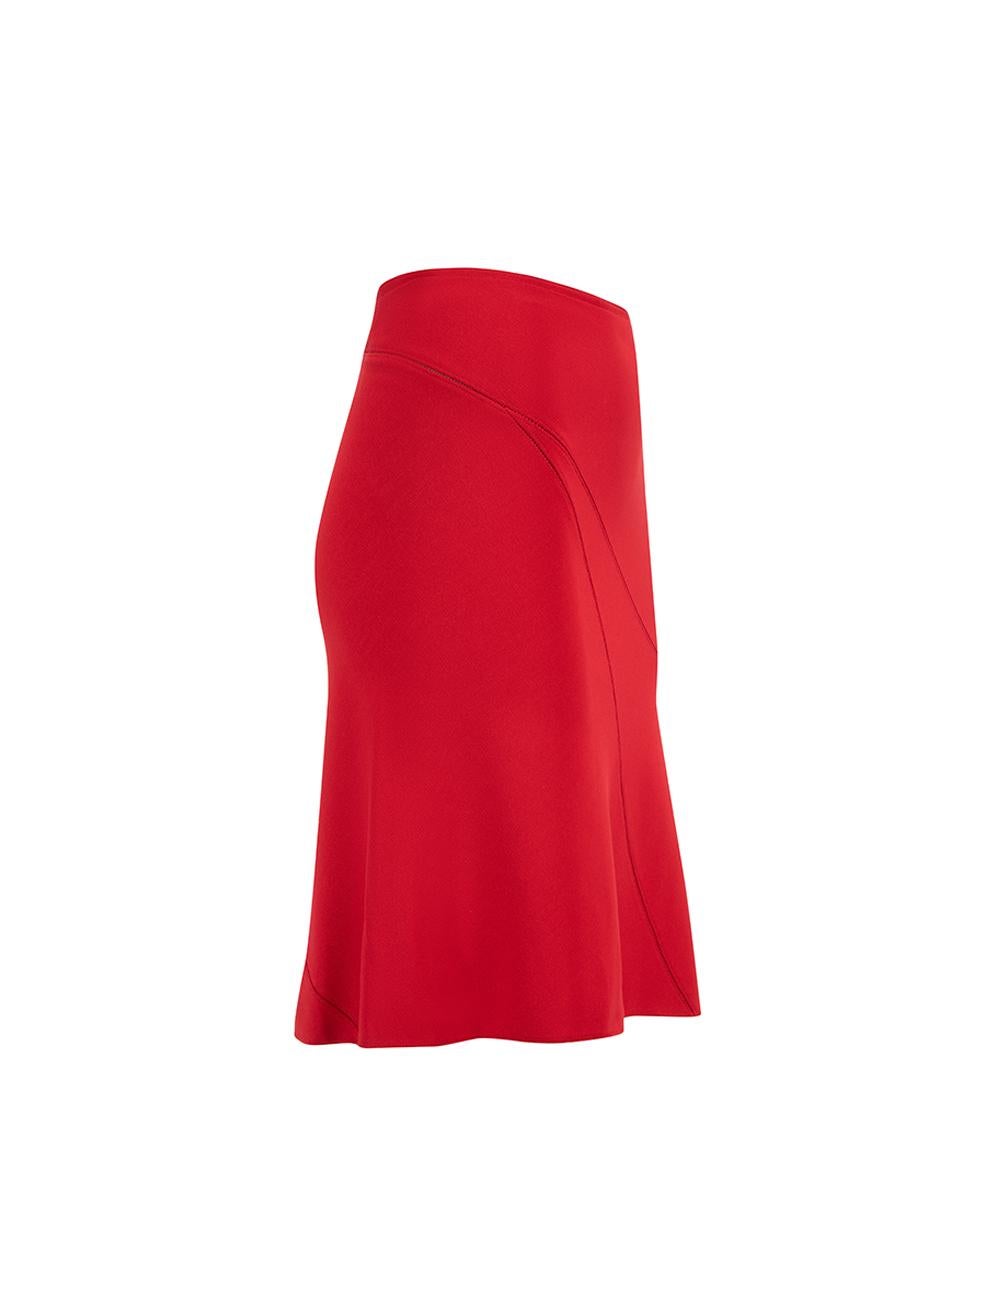 CONDITION is Very good. Hardly any visible wear to skirt is evident. Brand label has come unstitched at one side and there are minimal loose threads to the interior around the base of the zipper on this used Alaïa designer resale item. Details Red